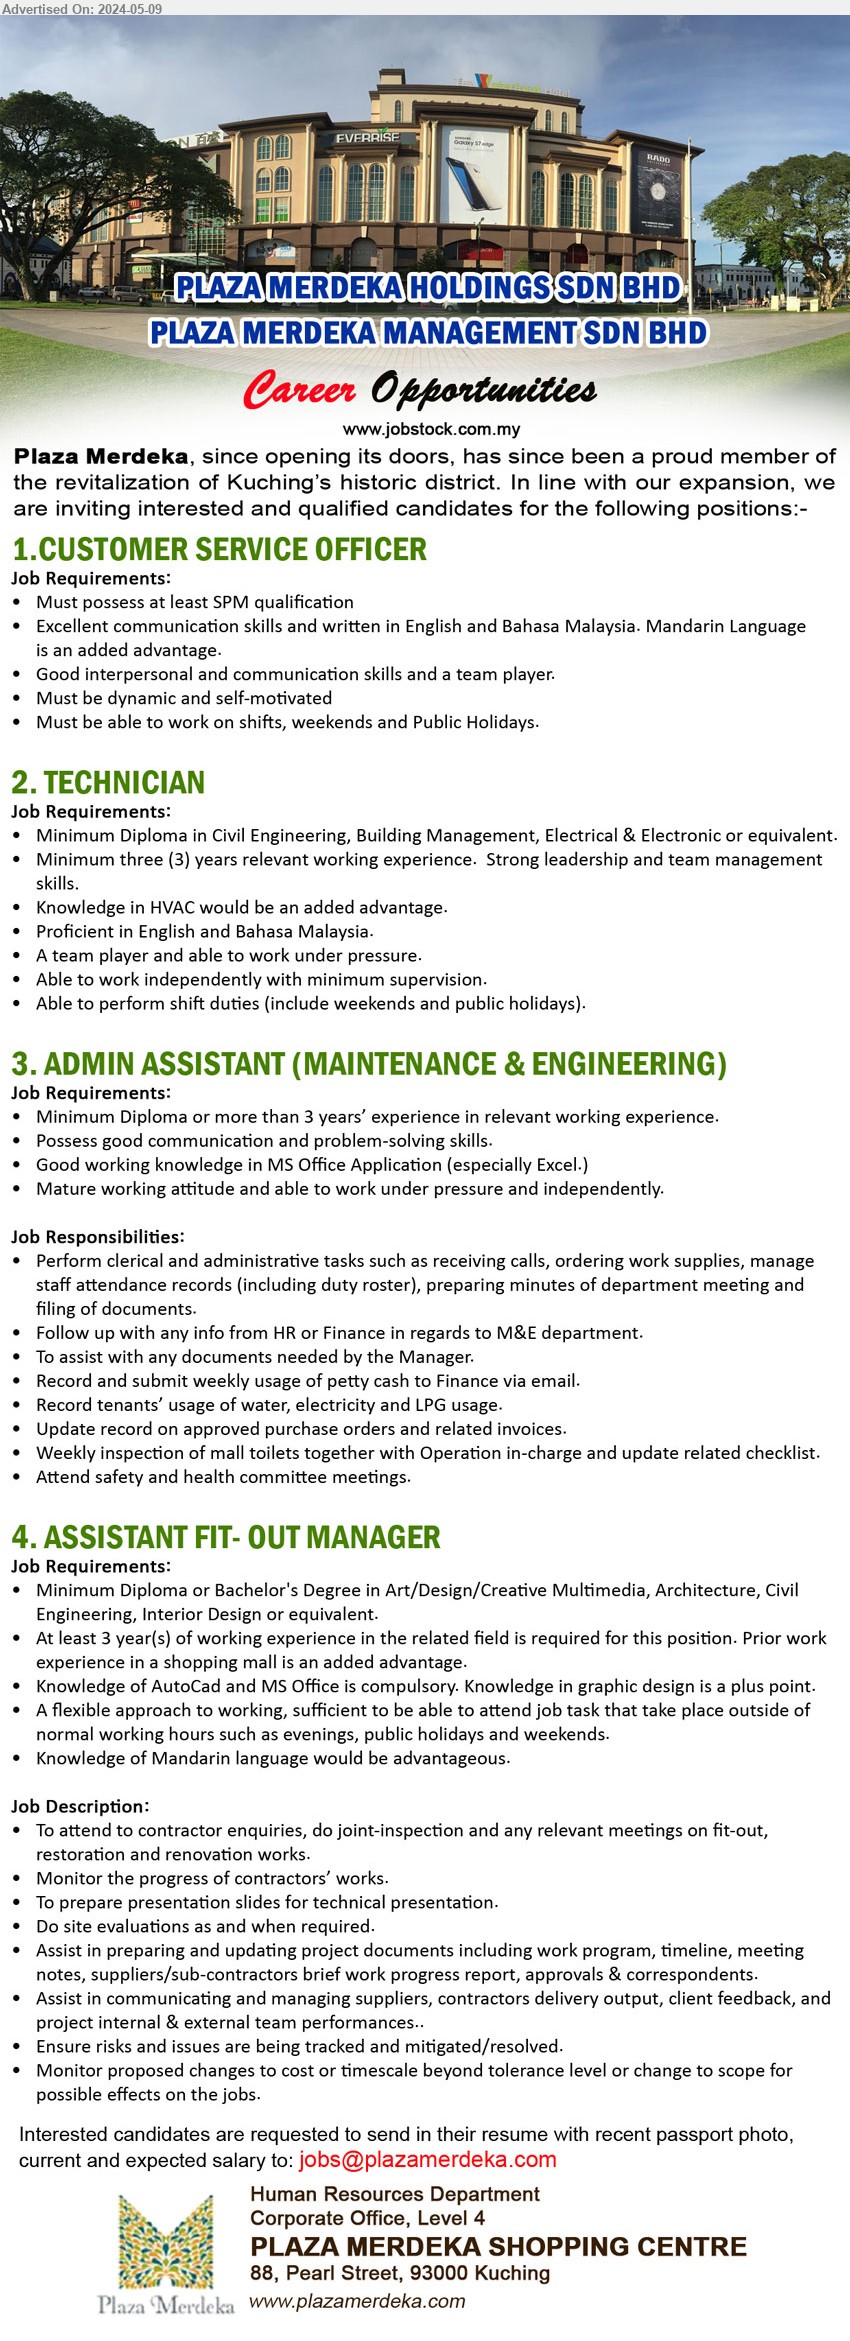 PLAZA MERDEKA SHOPPING CENTRE - 1.CUSTOMER SERVICE OFFICER (Kuching), SPM, Excellent communication skills and written in English and Bahasa Malaysia. Mandarin Language is an added advantage.,...
2. TECHNICIAN (Kuching), Diploma in Civil Engineering, Building Management, Electrical & Electronic,...
3. ADMIN ASSISTANT (MAINTENANCE & ENGINEERING) (Kuching), Diploma or more than 3 years’ experience, Good working knowledge in MS Office Application (especially Excel.),...
4. ASSISTANT FIT- OUT MANAGER (Kuching), Diploma or Bachelor's Degree in Art/Design/Creative Multimedia, Architecture, Civil 
Engineering, Interior Design,...
Email resume to ...